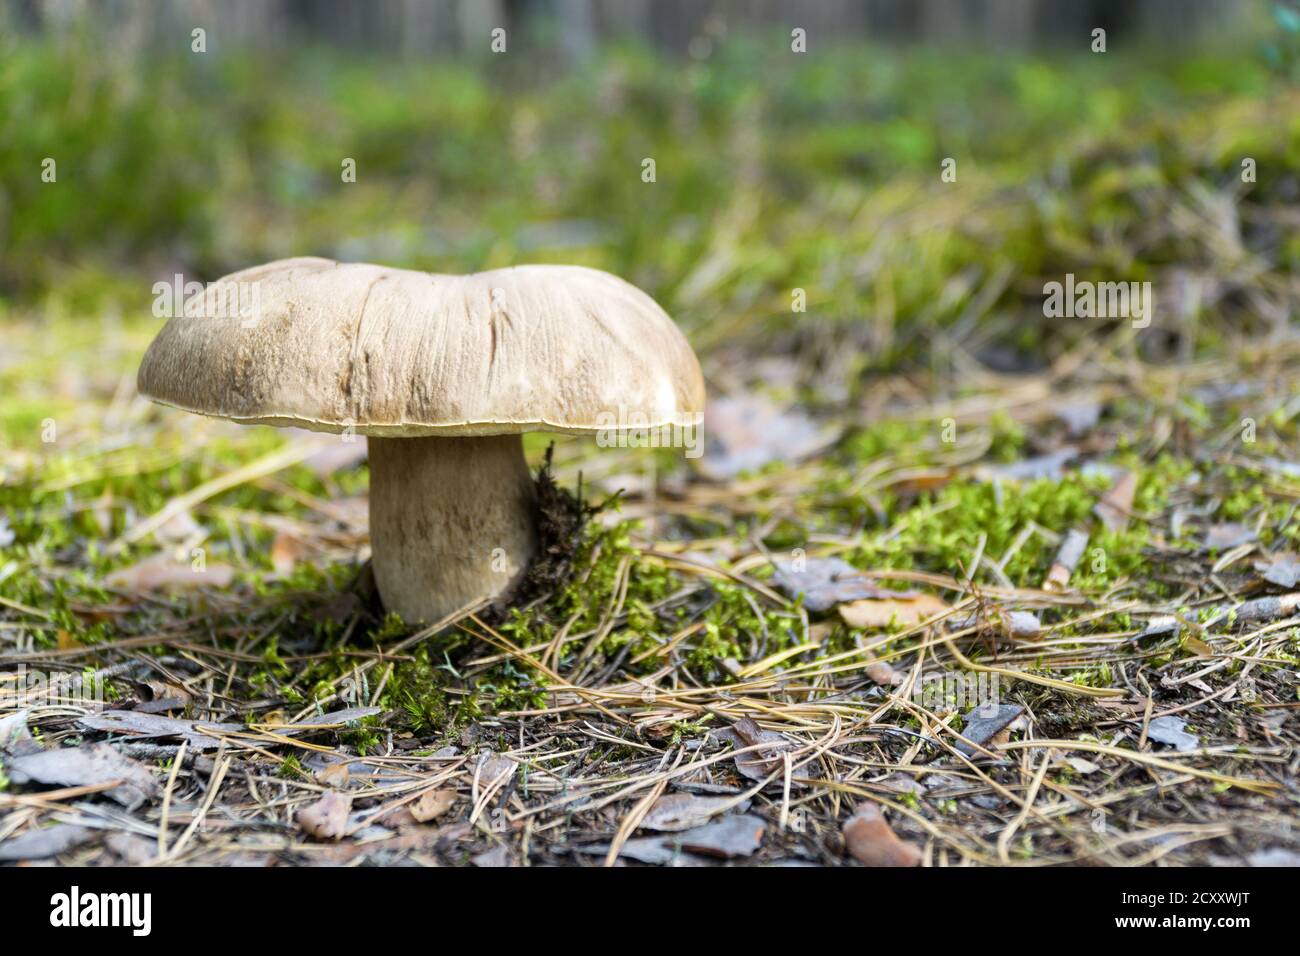 Big wild mushroom (Boletus) growing in natural forest green moss in autumn. Closeup. Selective focus. Stock Photo